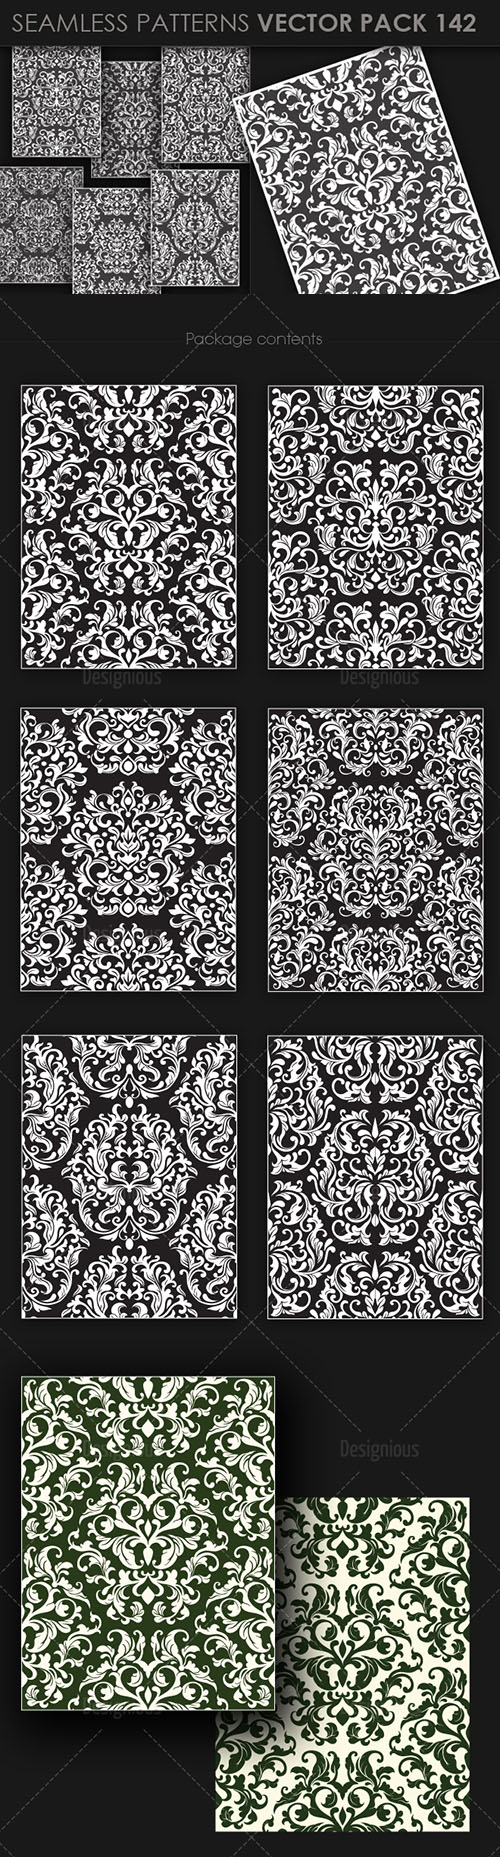 Seamless Patterns Vector Pack 142